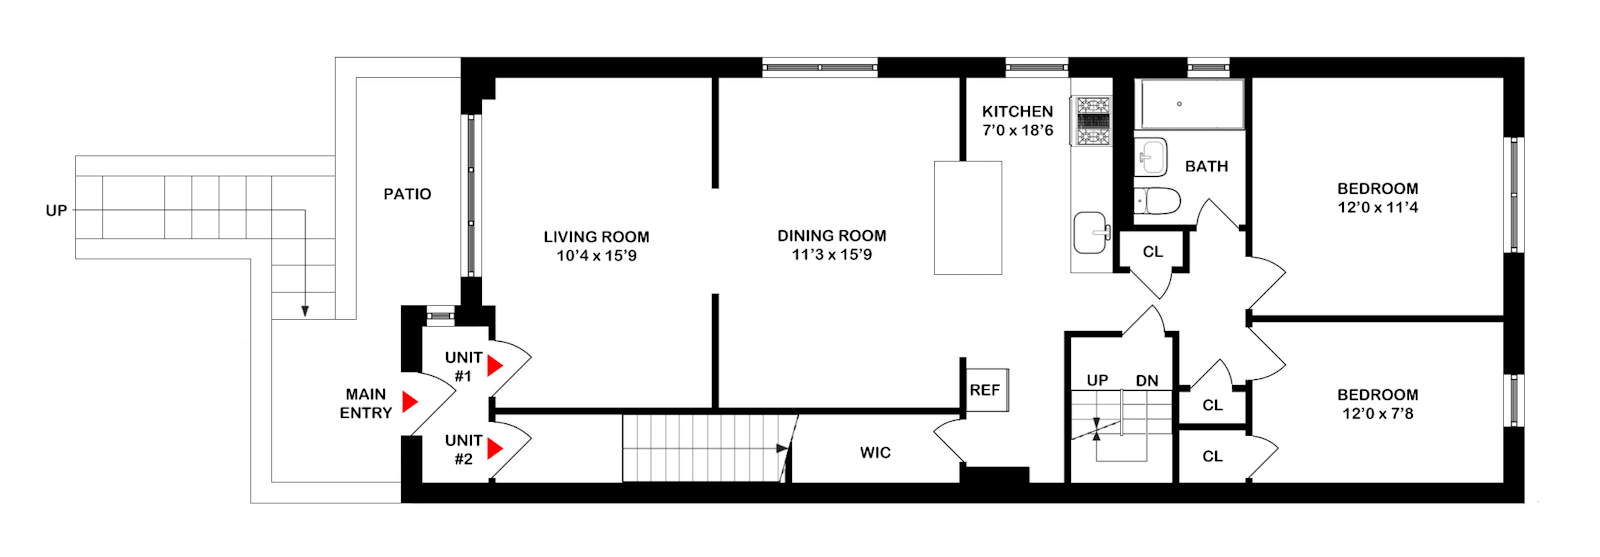 Floorplan for 50-53 39th Place